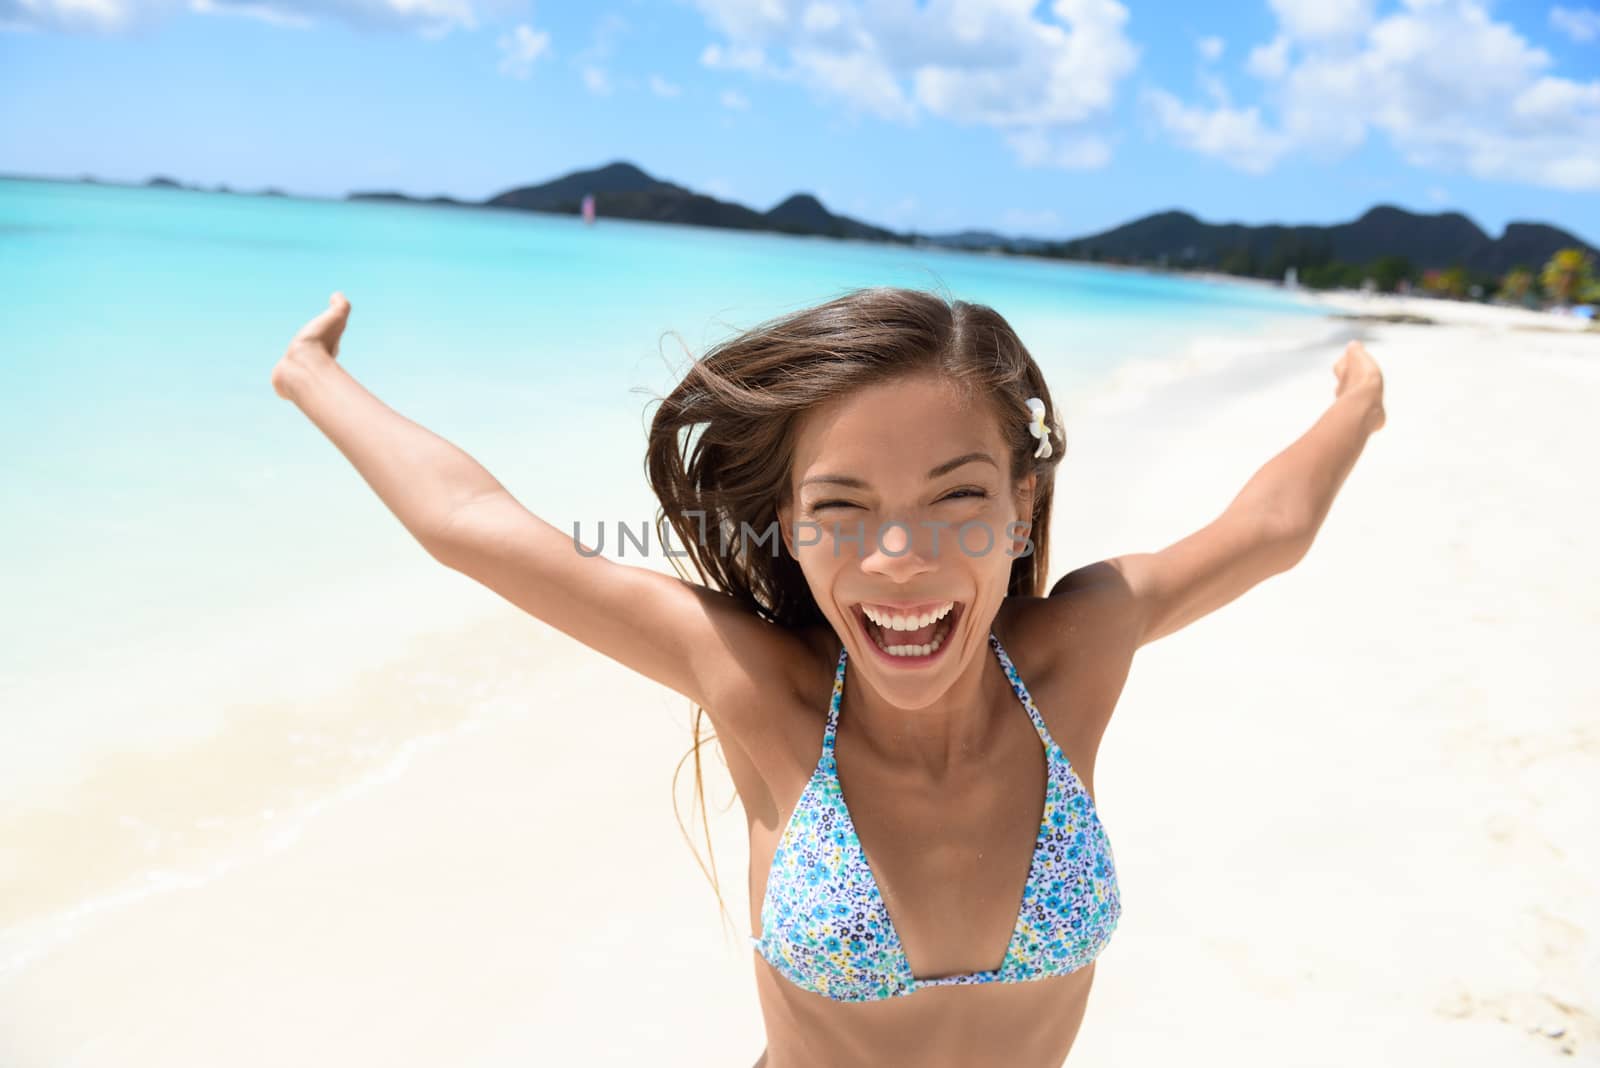 Exhilarated young woman screaming on beach. Portrait of cheerful female in bikini enjoying her summer vacation. Attractive tourist is standing with arms outstretched in nature.